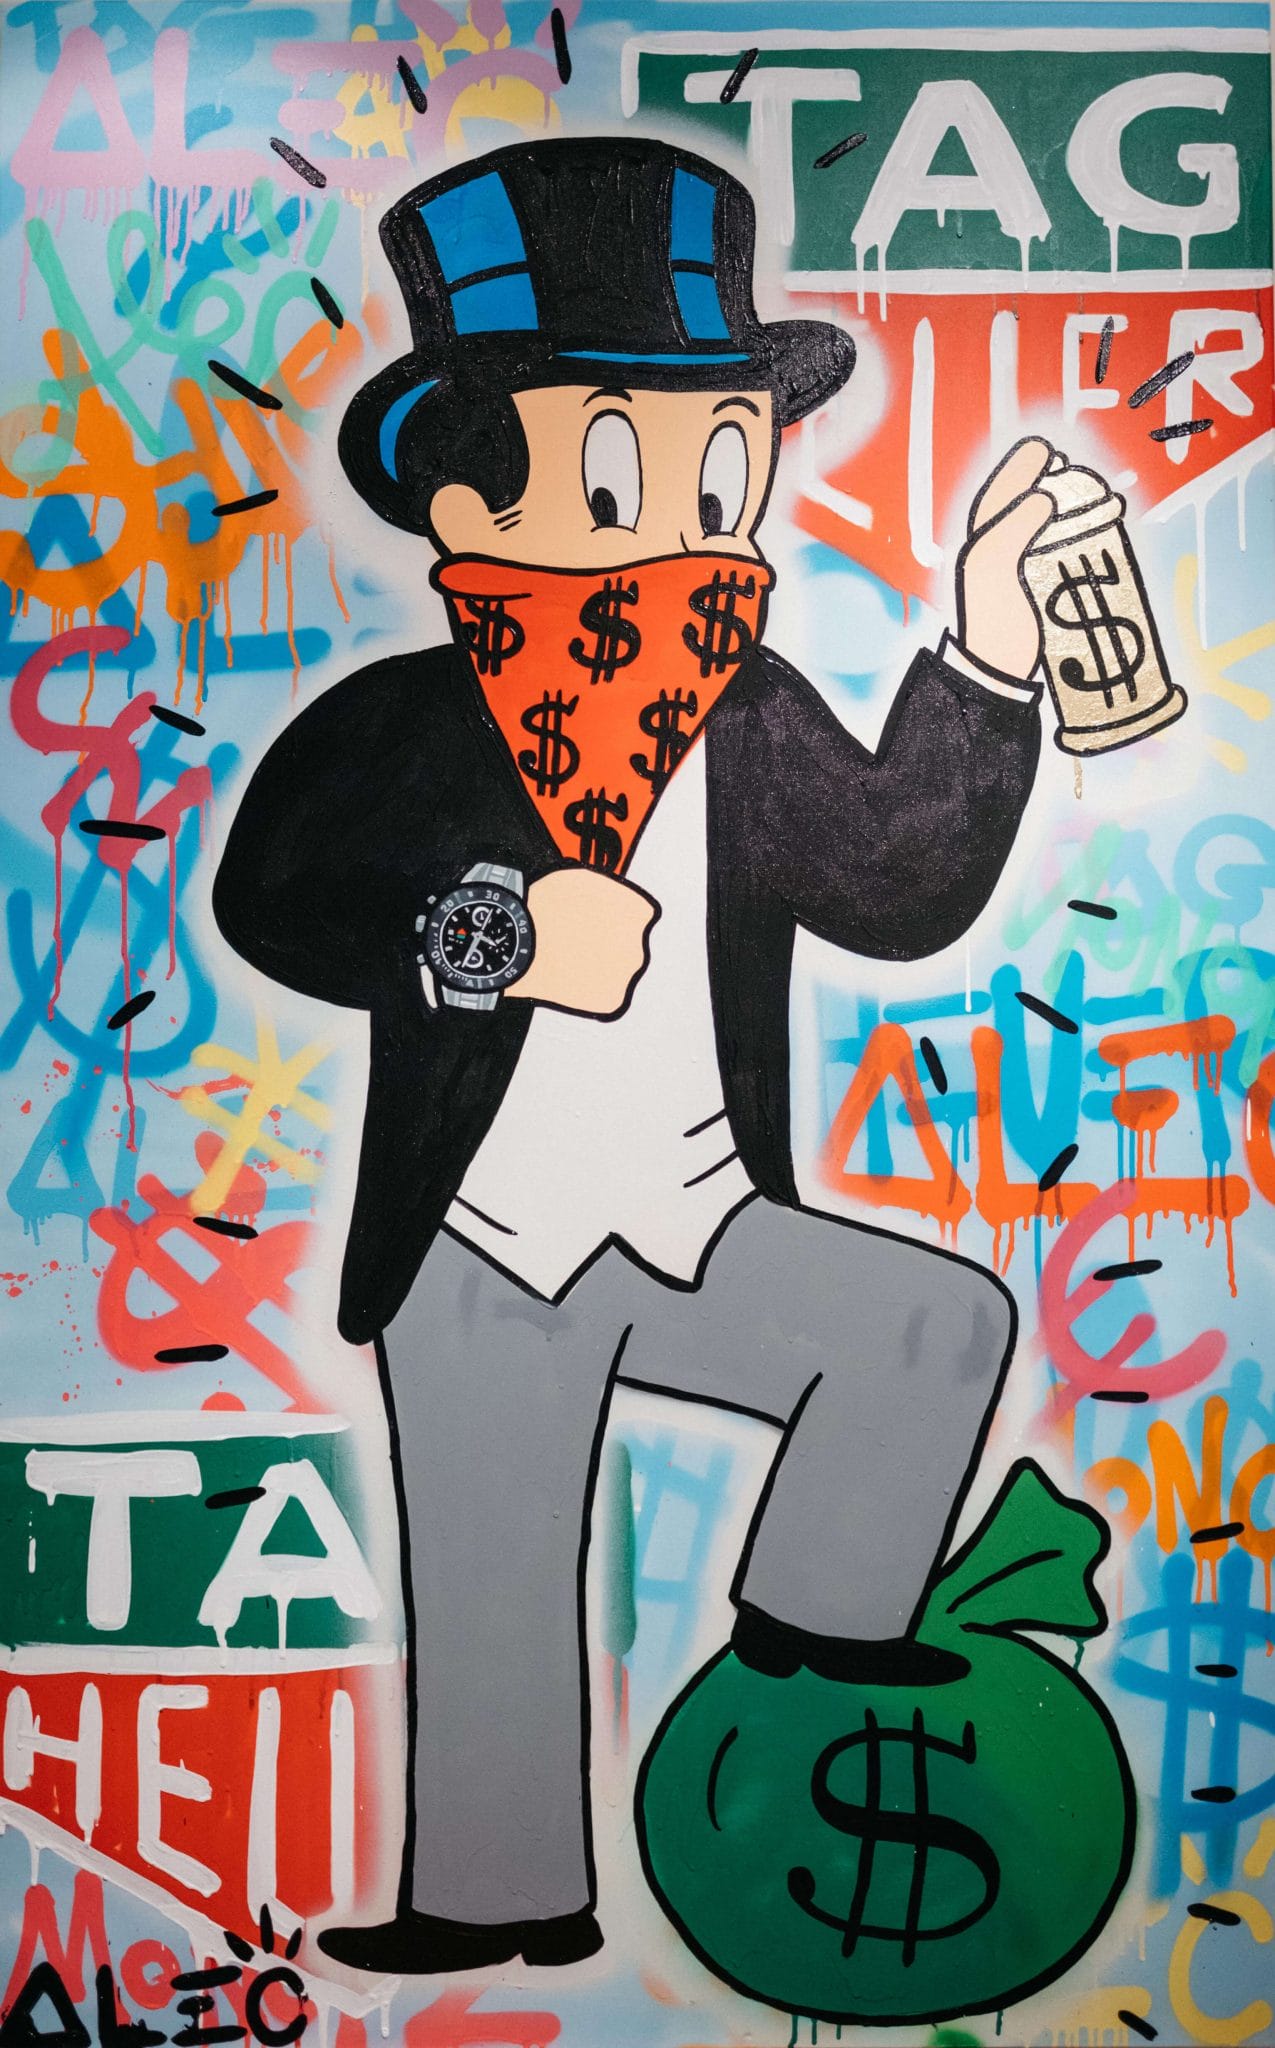 Rolex X Scrooge Mcduck NY CANVAS Alec Monopoly Inspired 